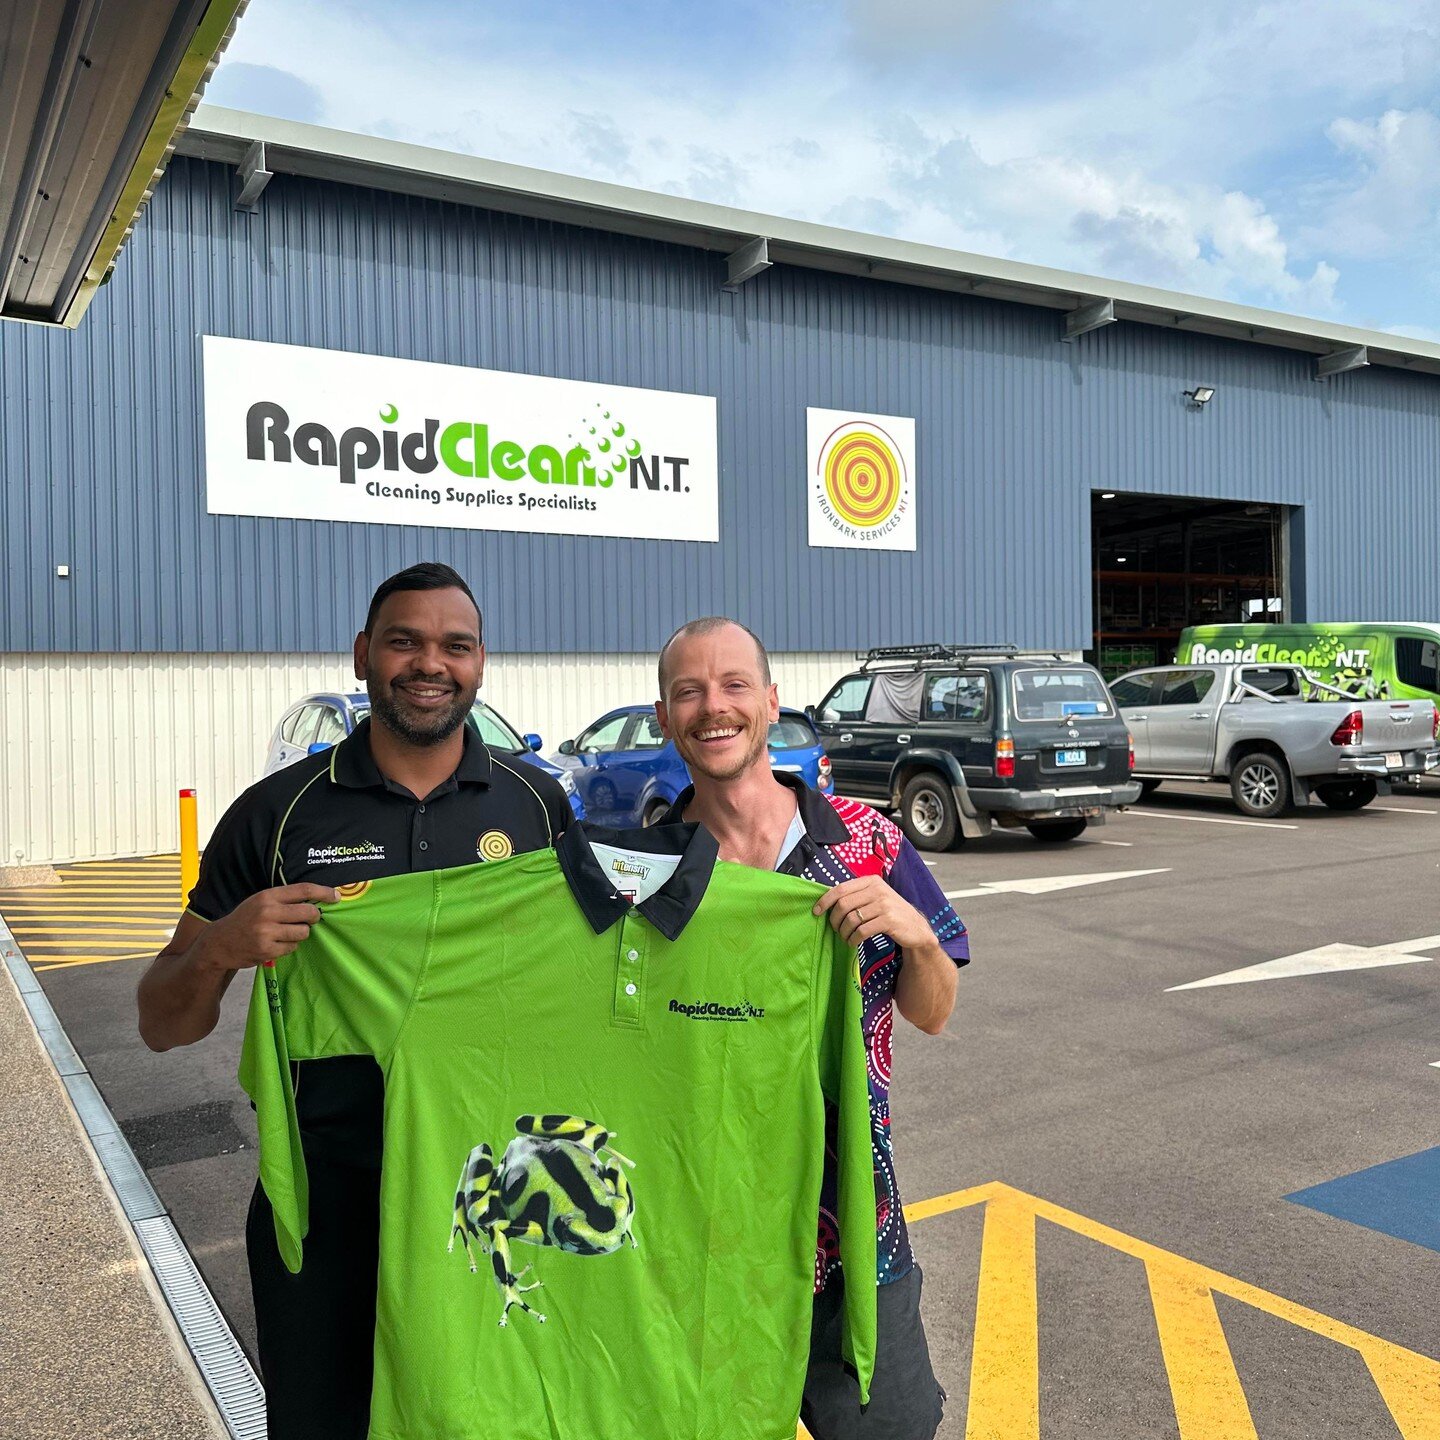 Kermit may have said &quot;it's not easy being green&quot; but it is easy fishing in this green fishing top! A huge thank you to our friends at Rapid Clean N.T and Ironbark for donating these sun-safe, visible and awesome fishing tops to use in our n